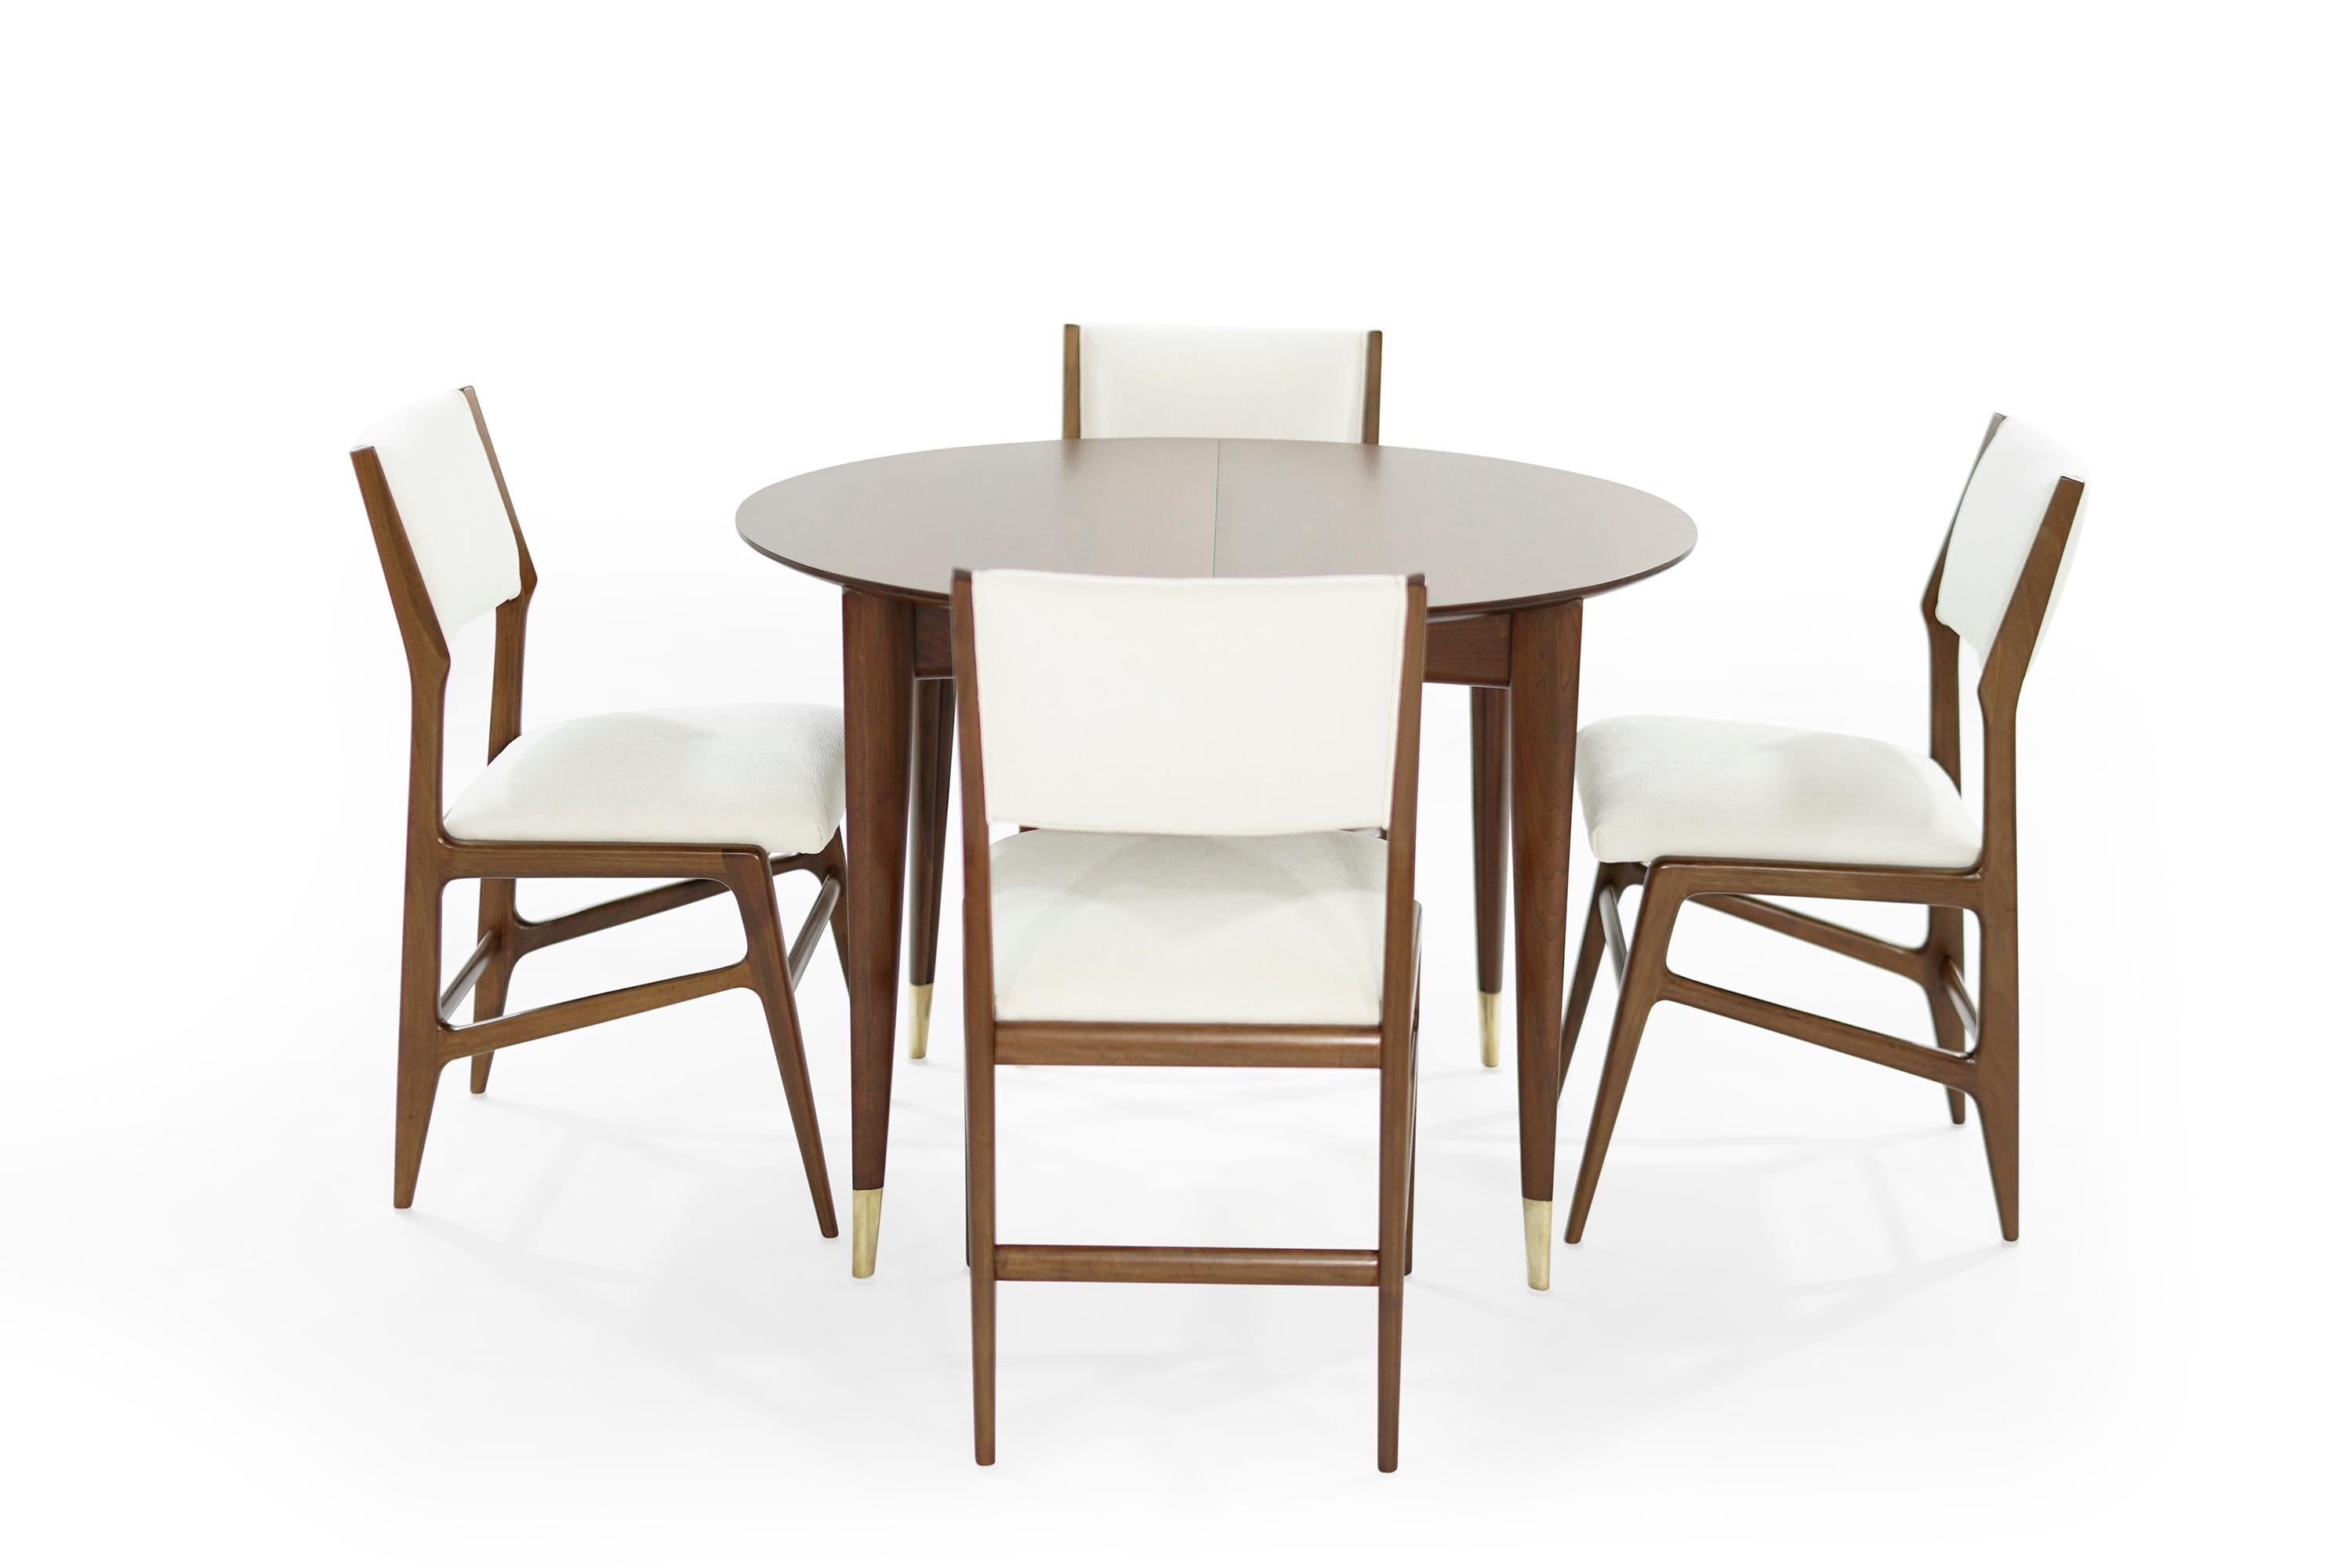 Extremely rare dining room set, designed by the iconic Gio Ponti for M. Singer & Sons, circa 1950-1959. Original label attached underneath the table. Pre-restoration images included.

Walnut dining table features Gio Ponti's signature brass